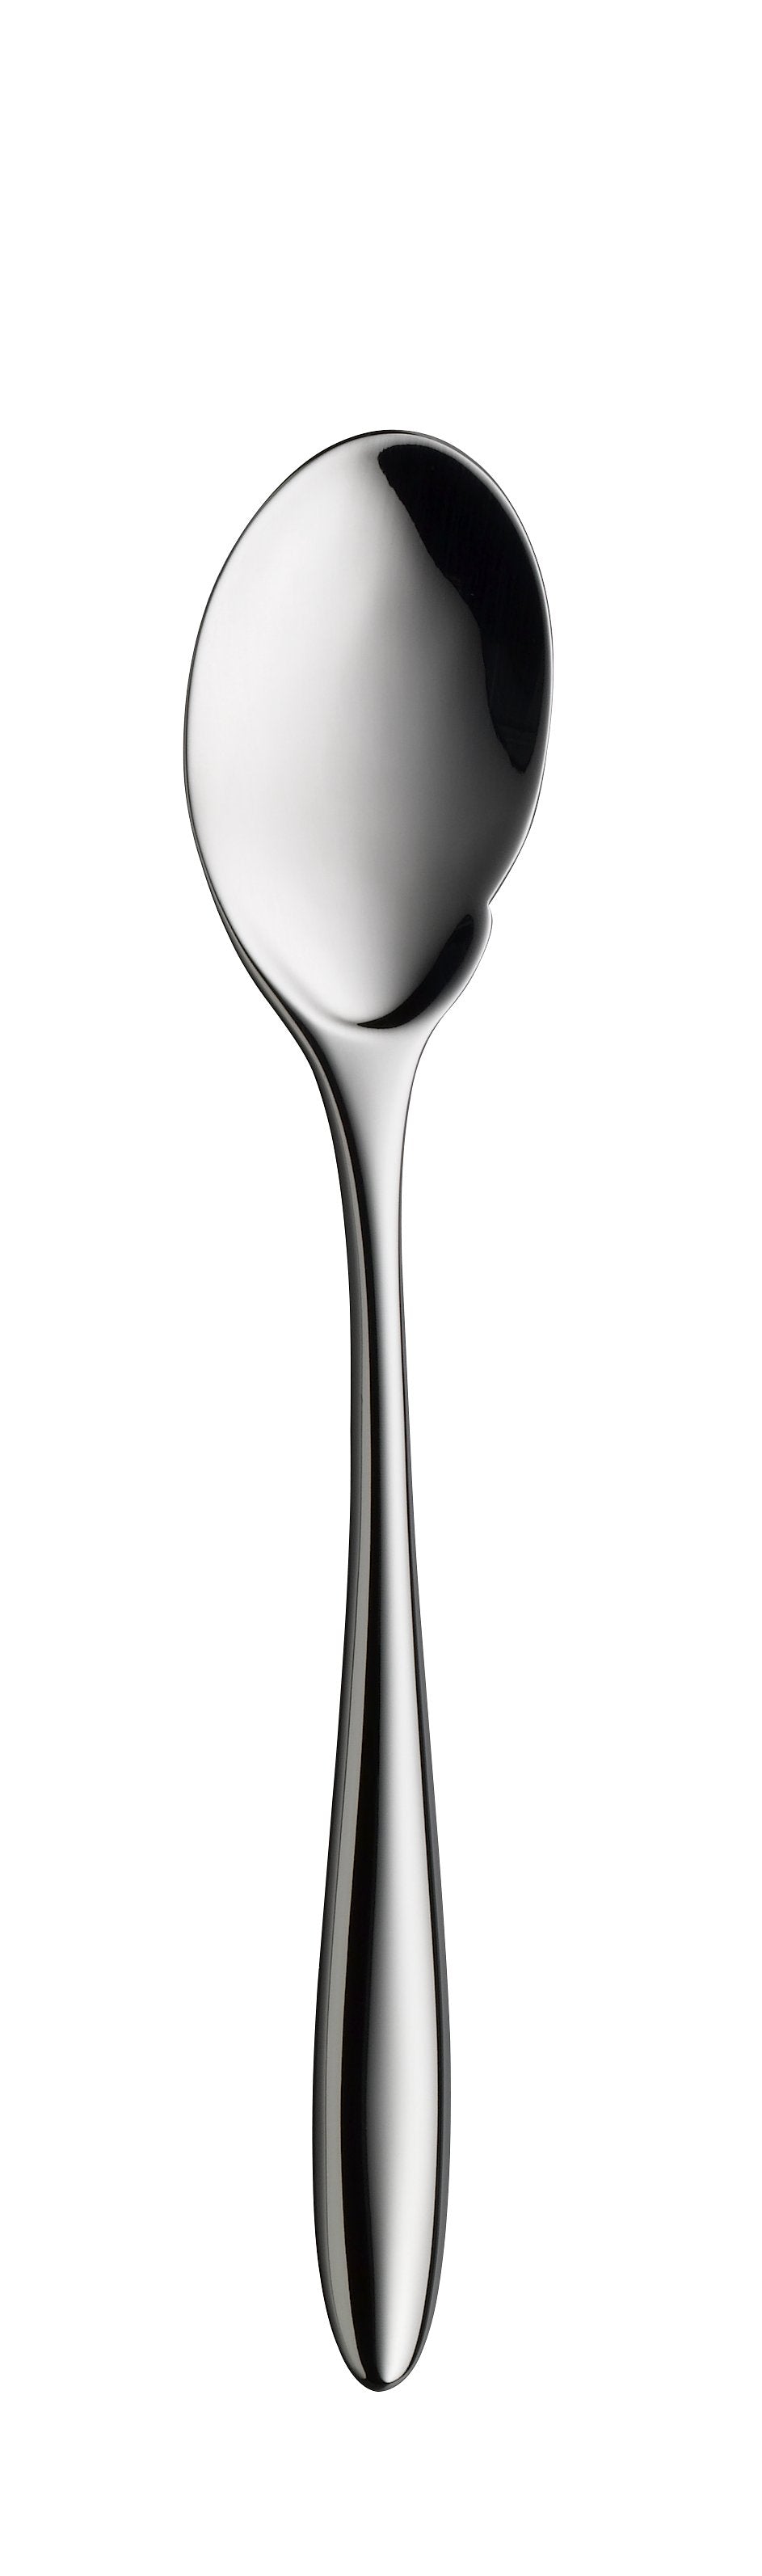 French sauce spoon AVES silver plated 200mm